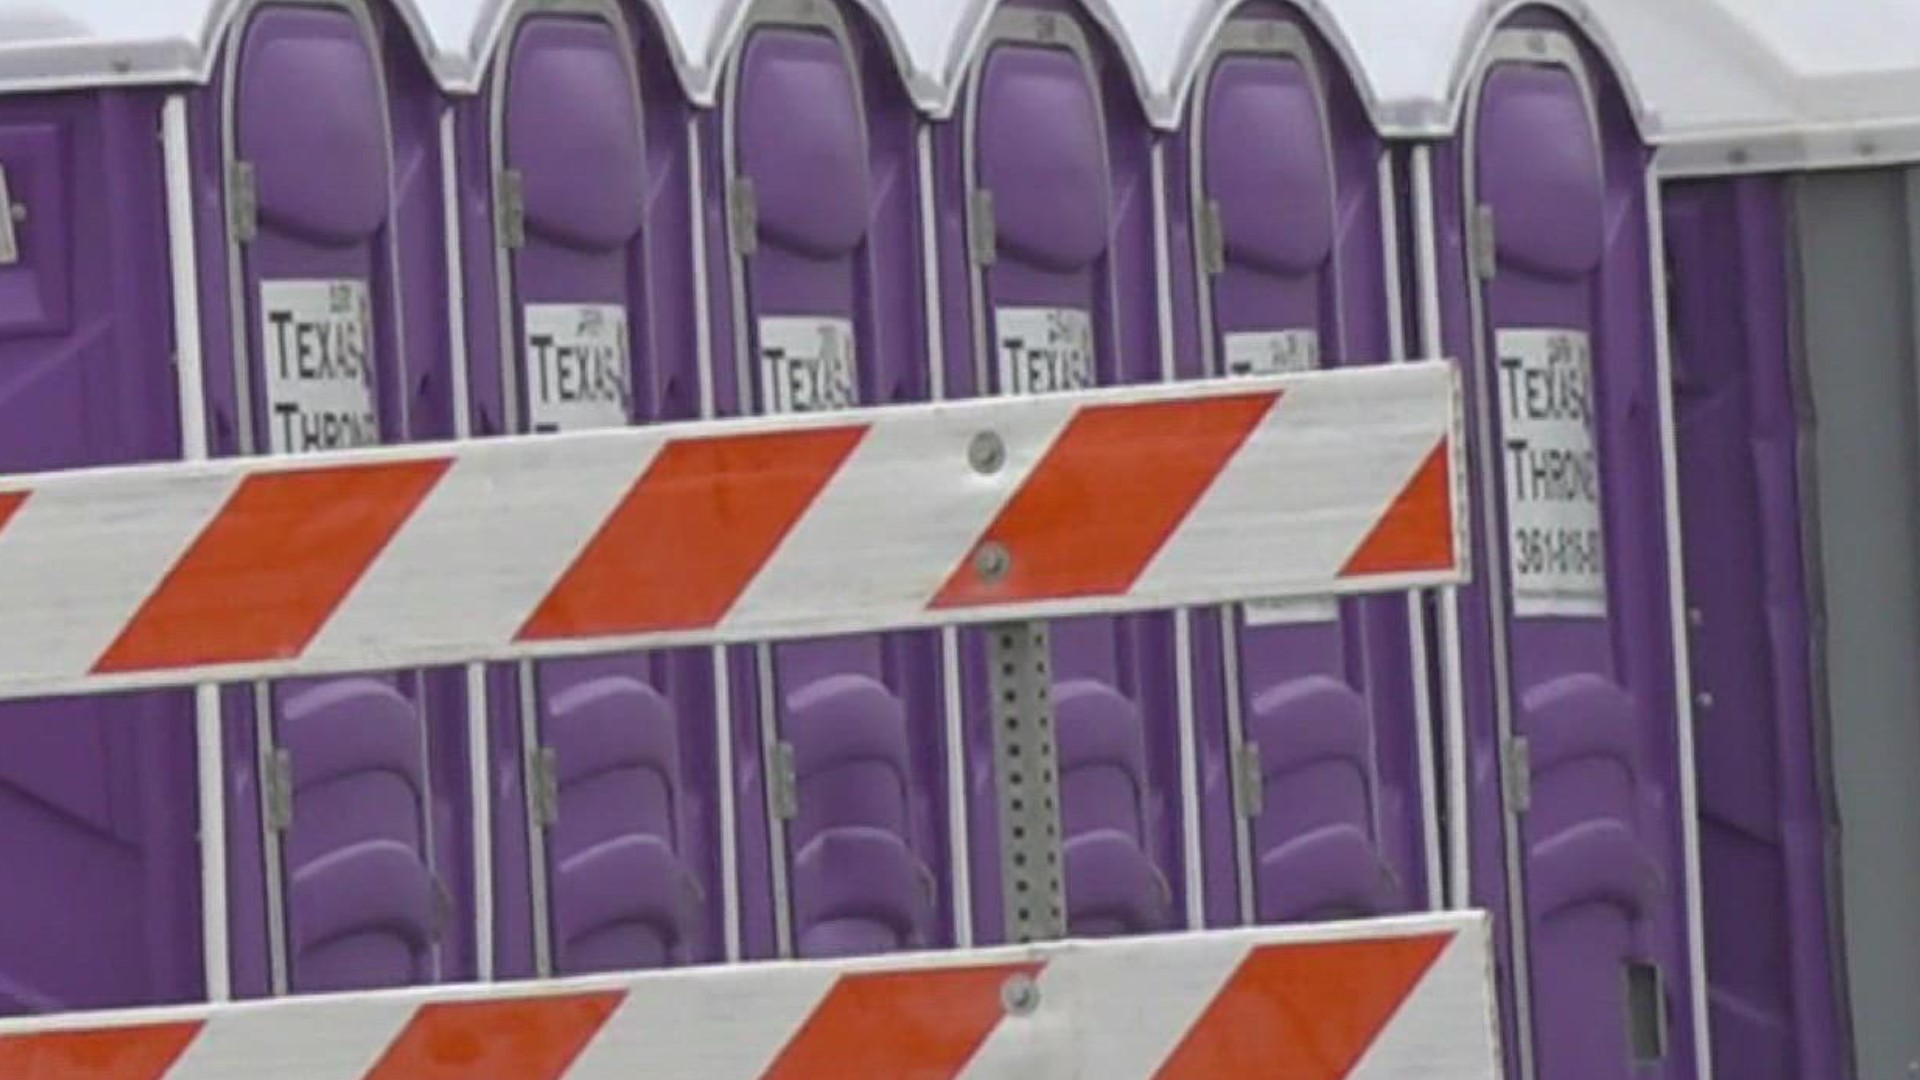 The City is allowing spectators to rent a portable restroom at their own expense, or bring their own to the parade viewing site after 5 p.m. on Friday.